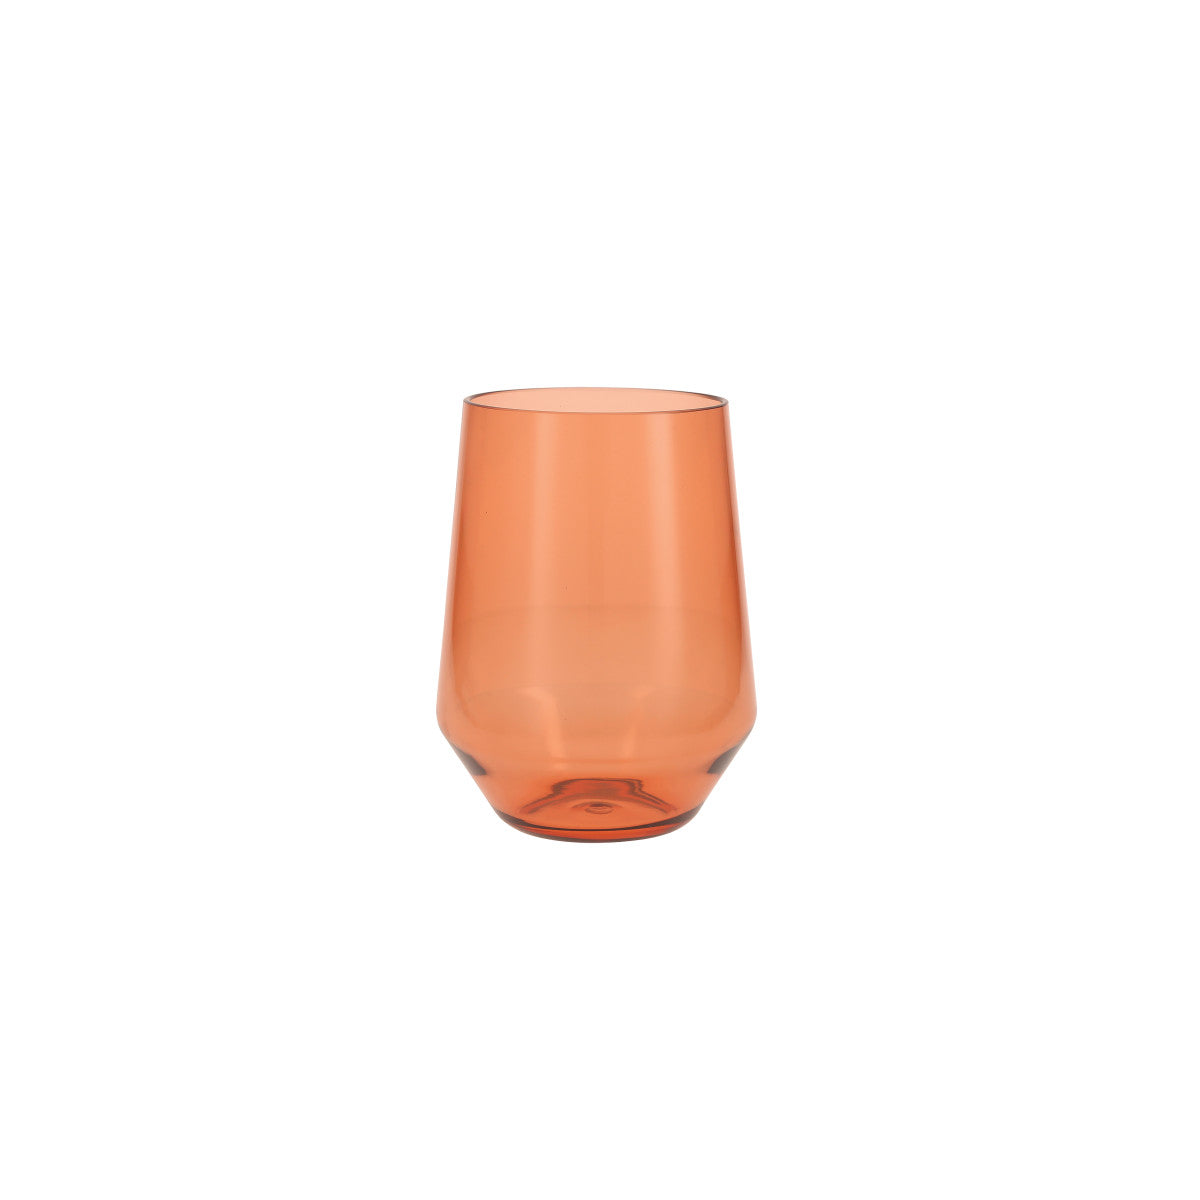 amber stemless wine glass on white background.